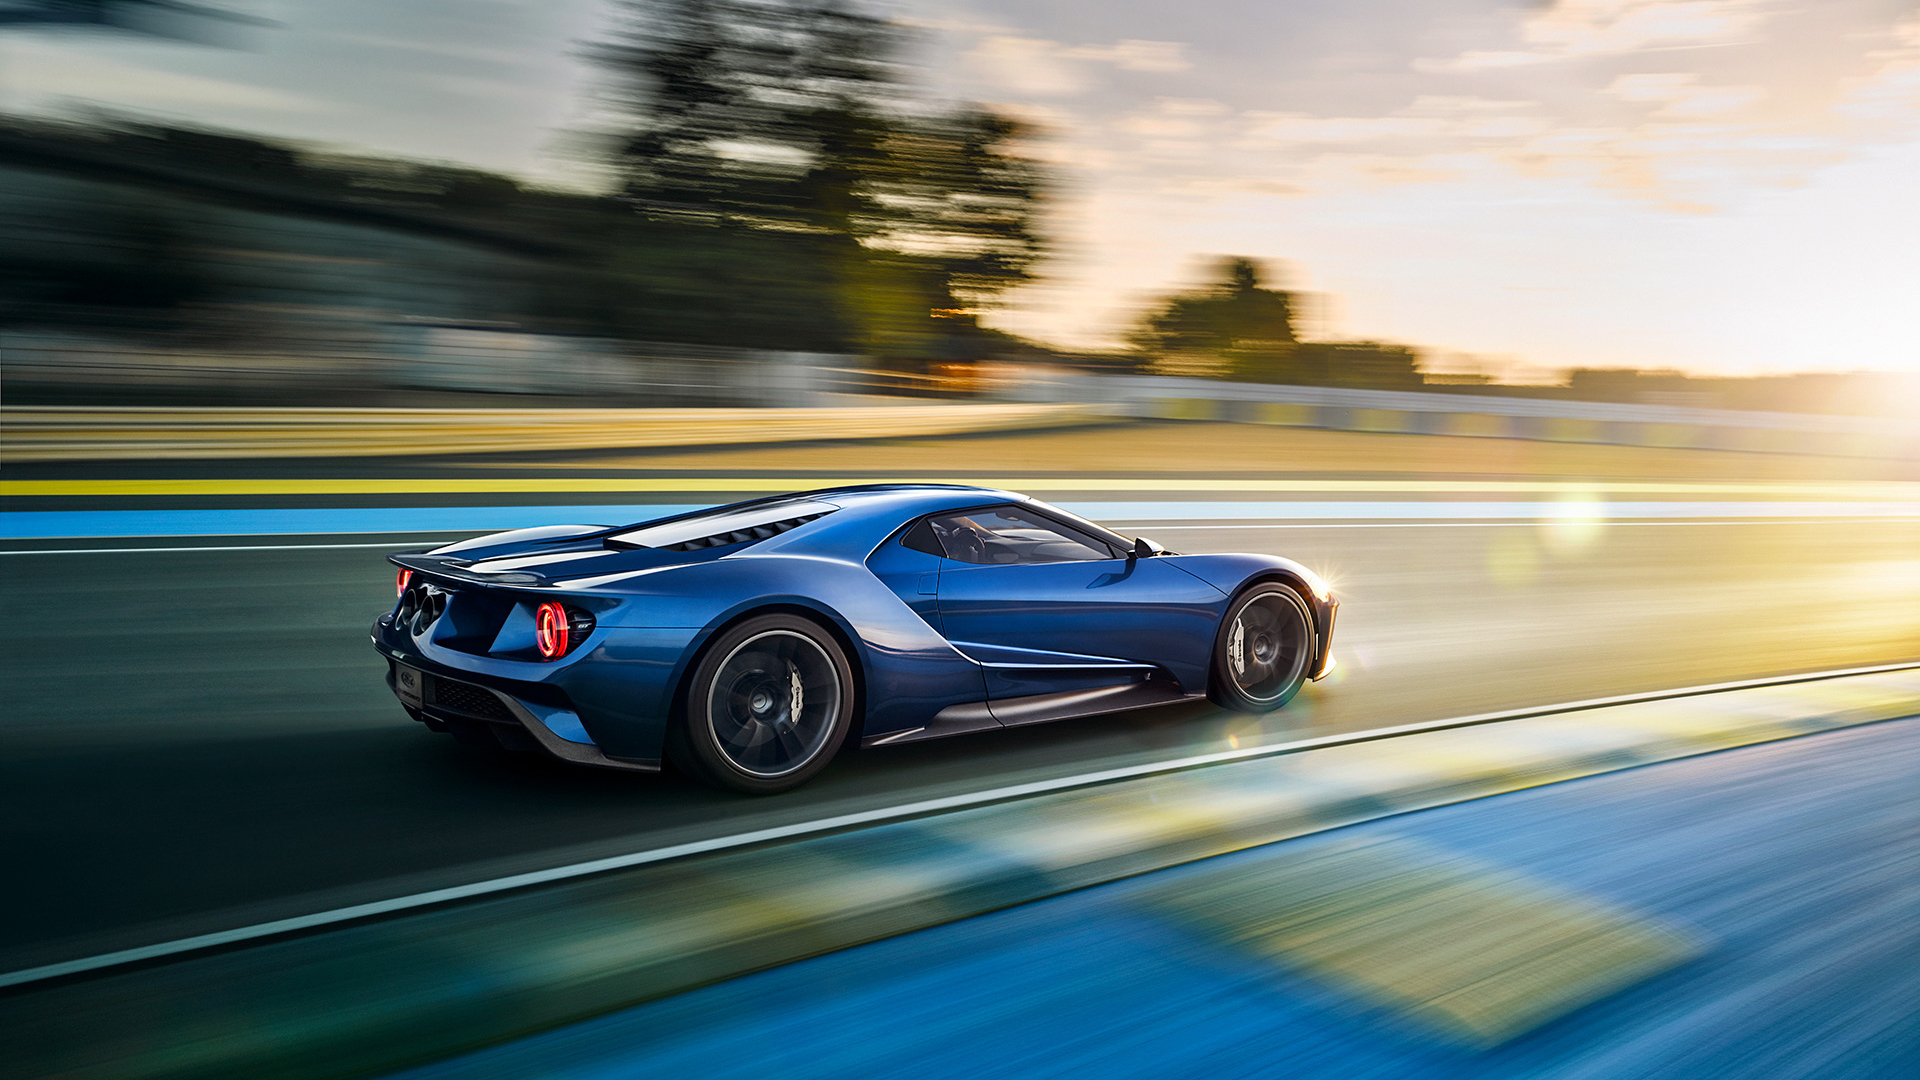 Car 2017 Ford GT Photography Blue Cars 2017 Year Vehicle 1920x1080